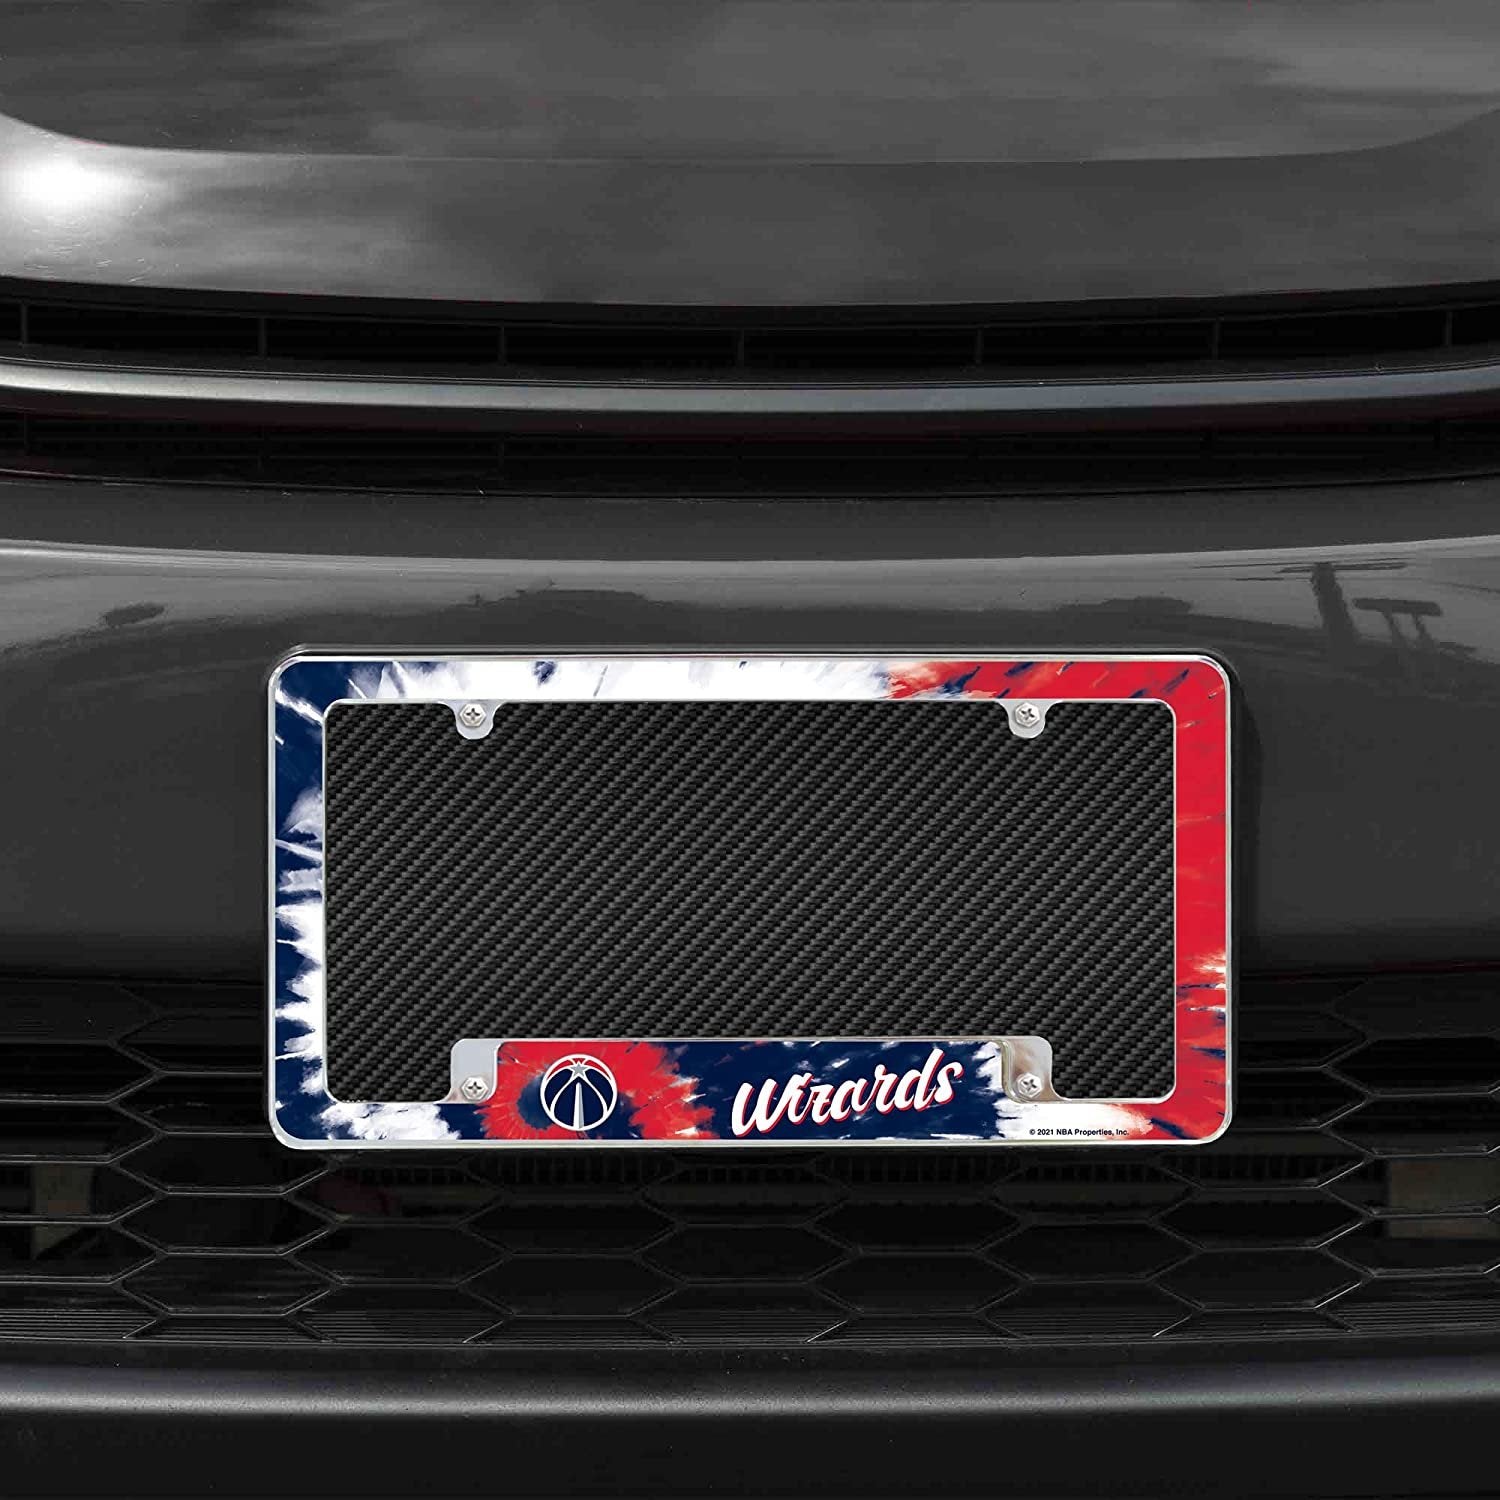 Washington Wizards Metal License Plate Frame Chrome Tag Cover Tie Dye Design 6x12 Inch